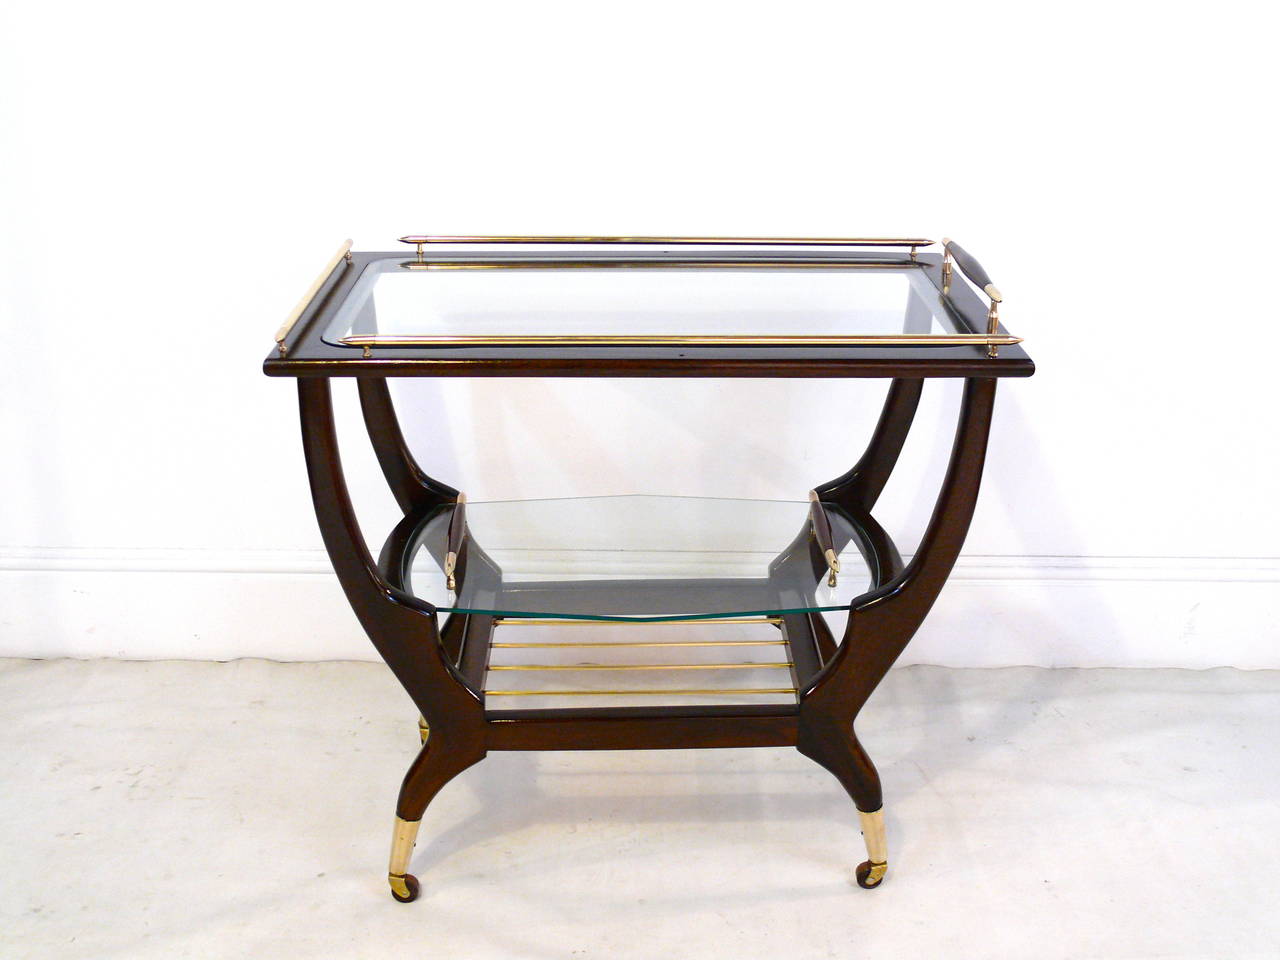 Fantastic three-tier bar cart in the manner of Gio Ponti with beautiful brass accents and casters. It has a top glass tier with brass stretchers, a middle glass removable tray with handles and a brass rod third tier. Refinished in a gorgeous